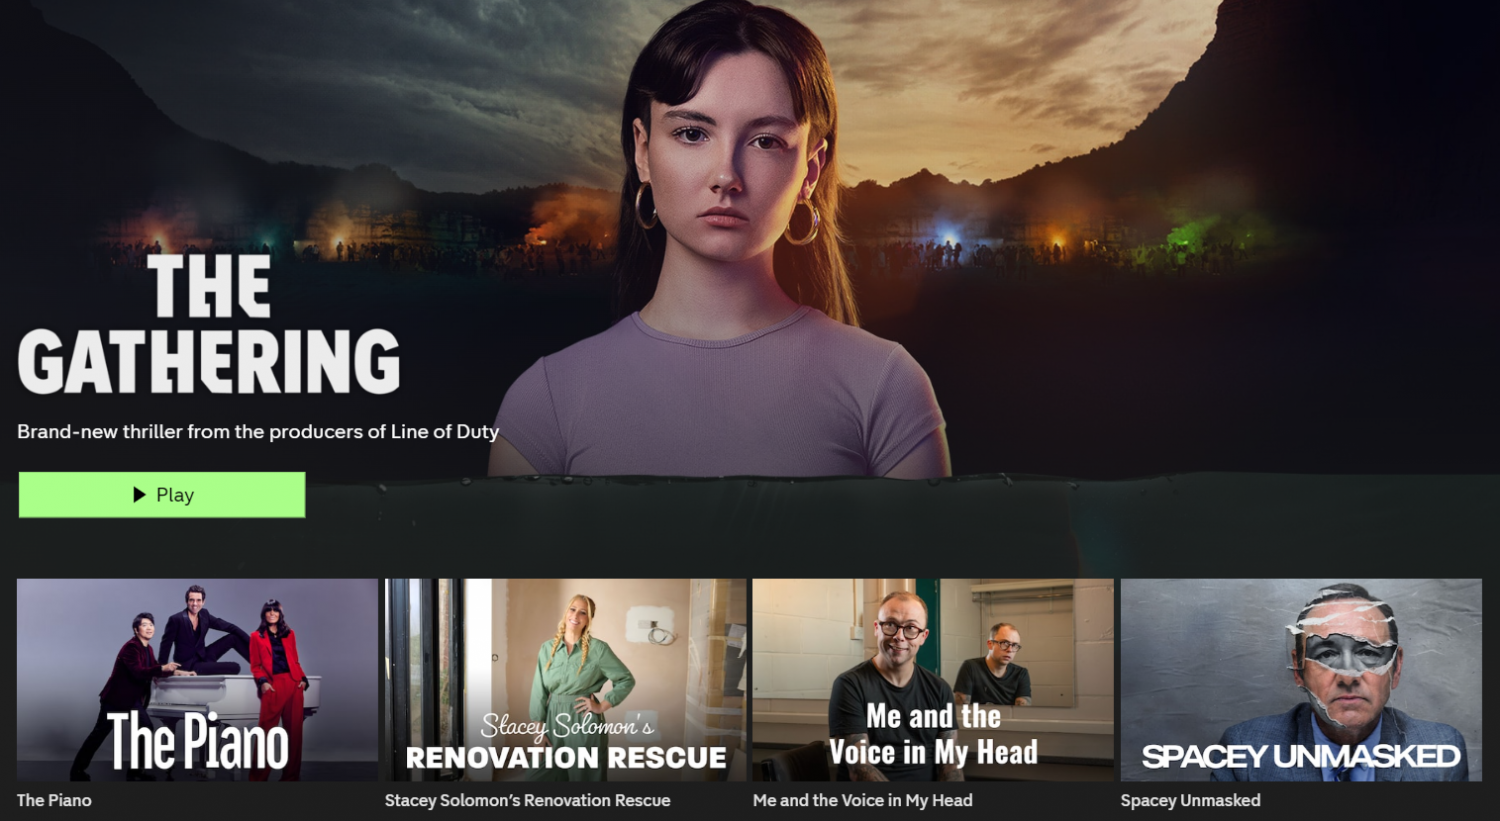 British Broadcaster Channel 4 Undergoes Major Makeover: More Personalized Recommendations, Show-Centric Design, and More